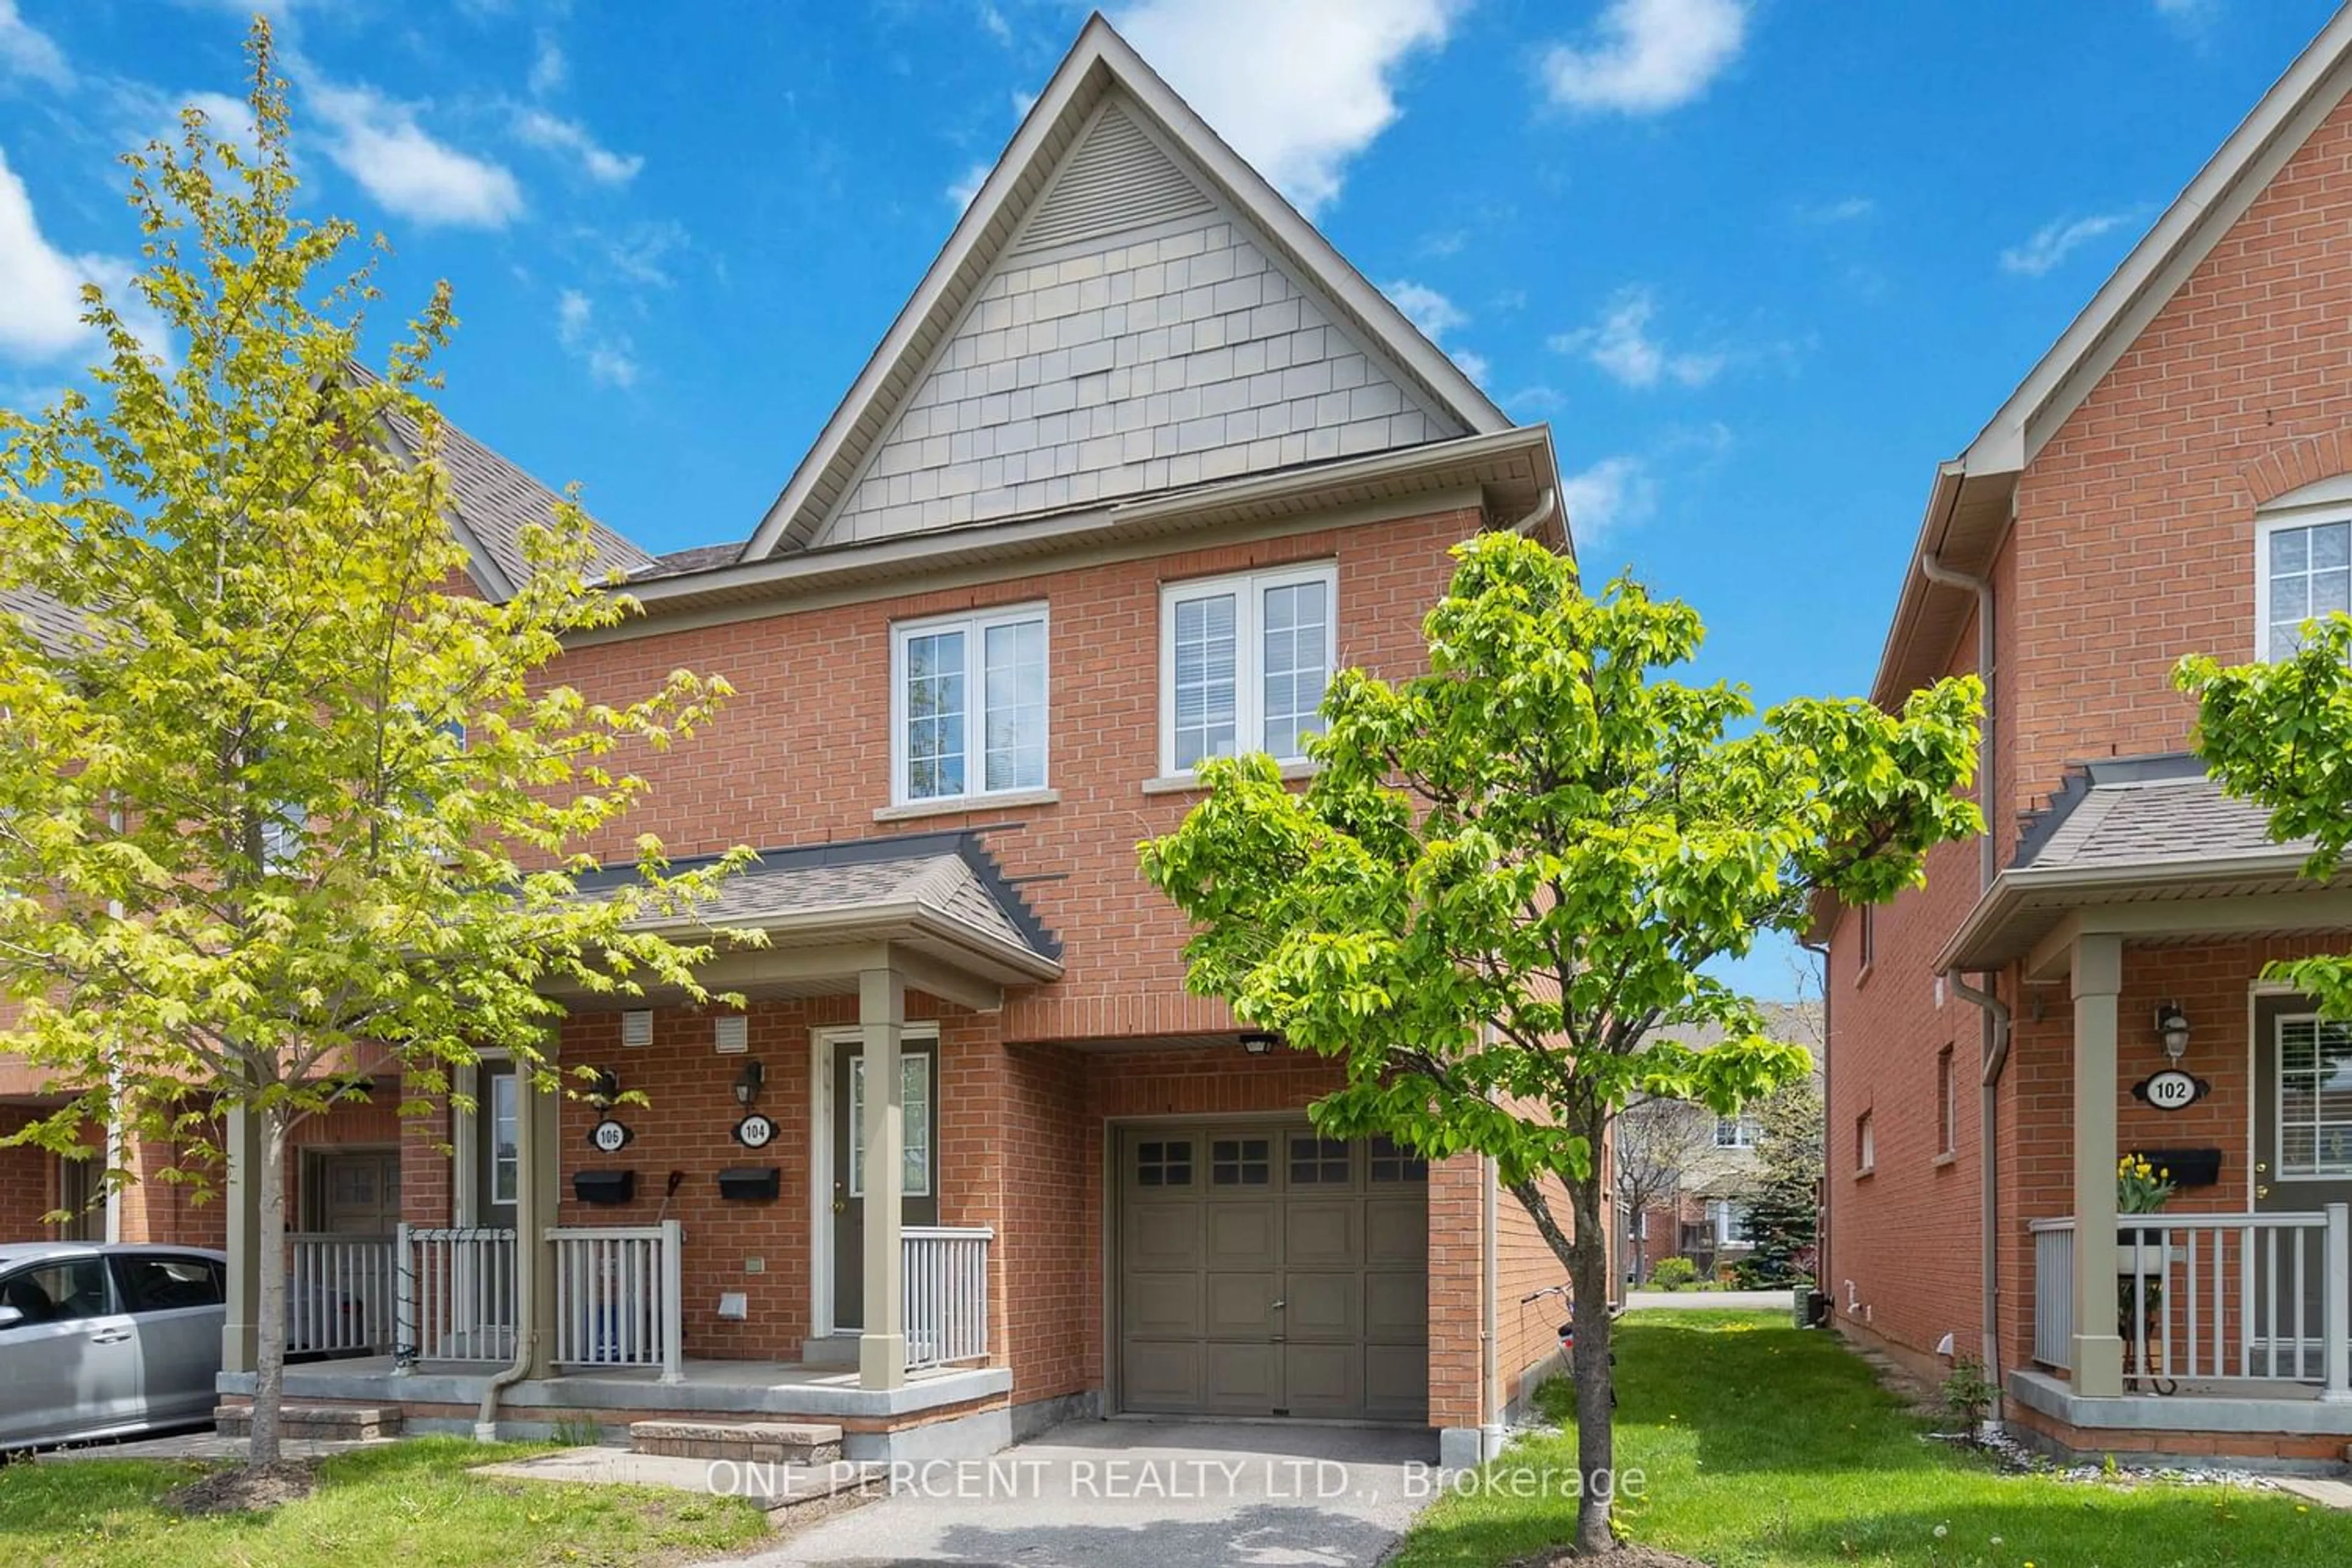 Home with brick exterior material for 3150 Erin Centre Blvd #104, Mississauga Ontario L5M 7Z3